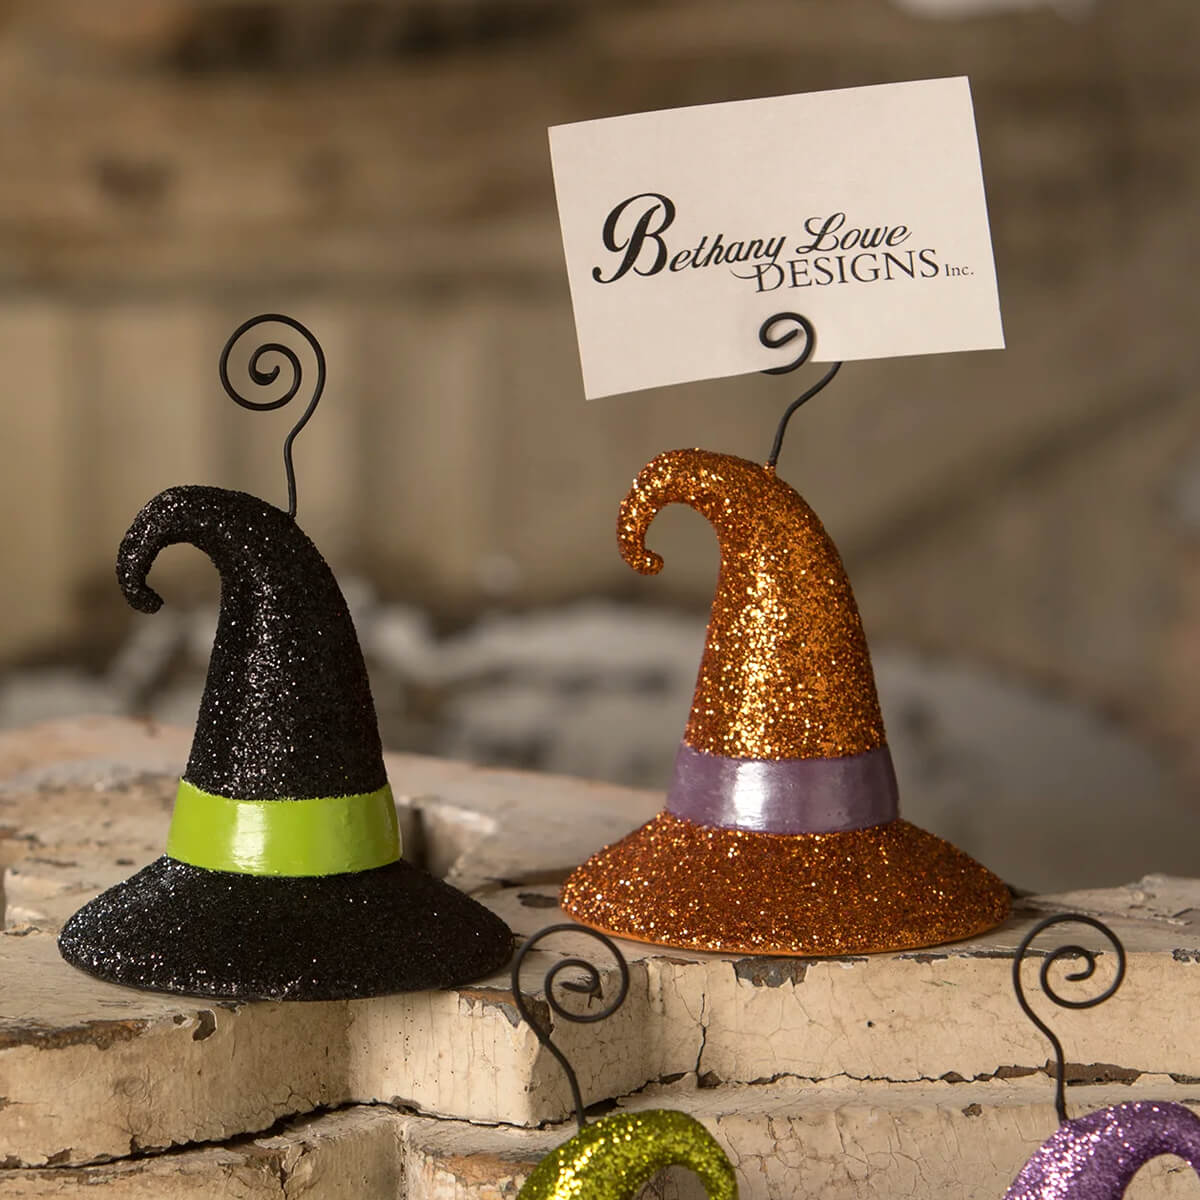 Purple Witch Hat Ornament Place Card Holder